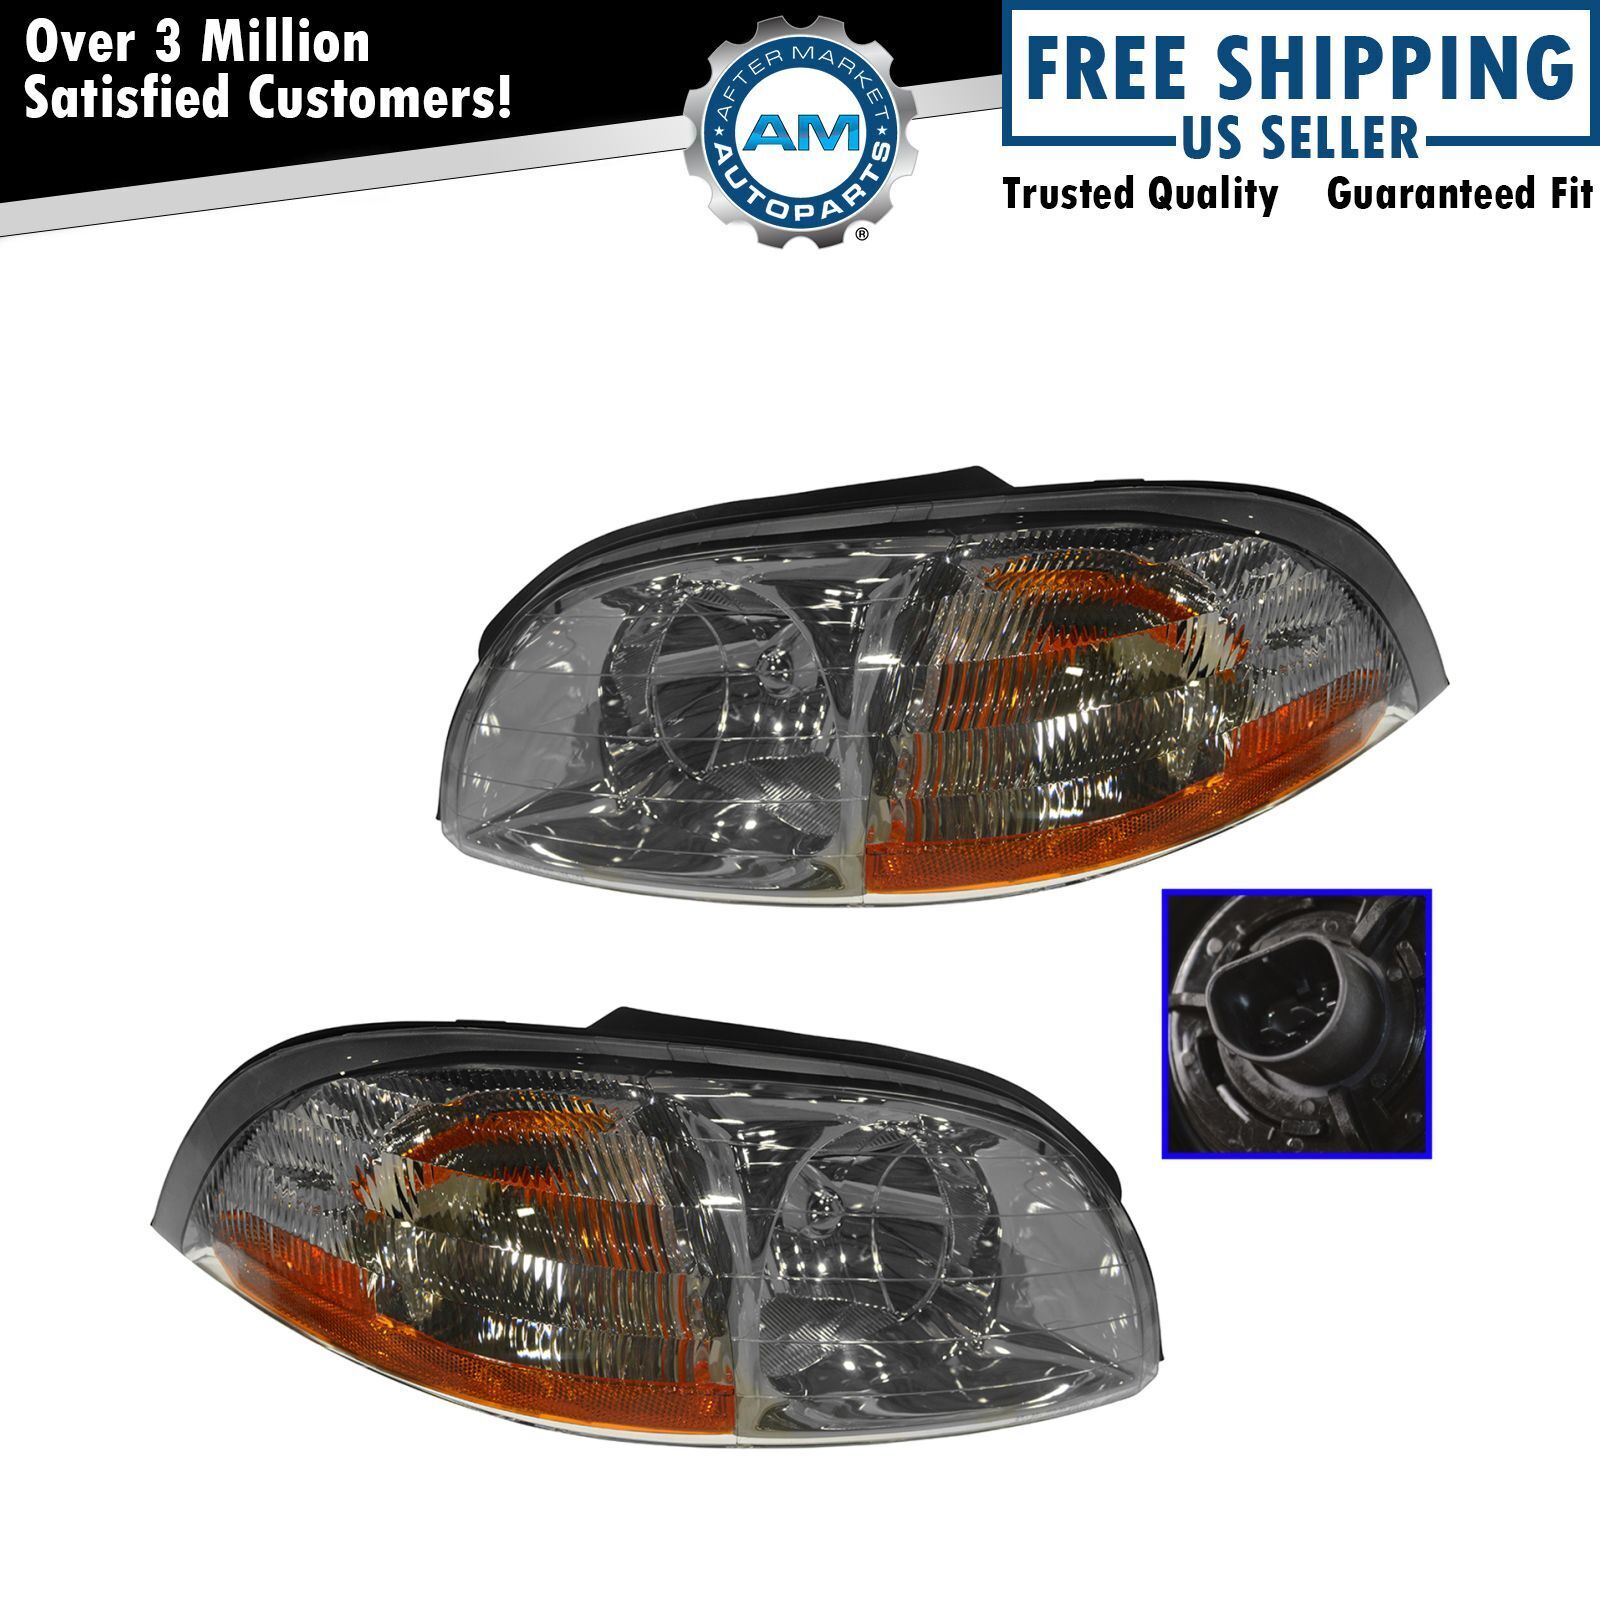 Headlights Headlamps Left & Right Pair Set NEW for 99-00 Ford Windstar